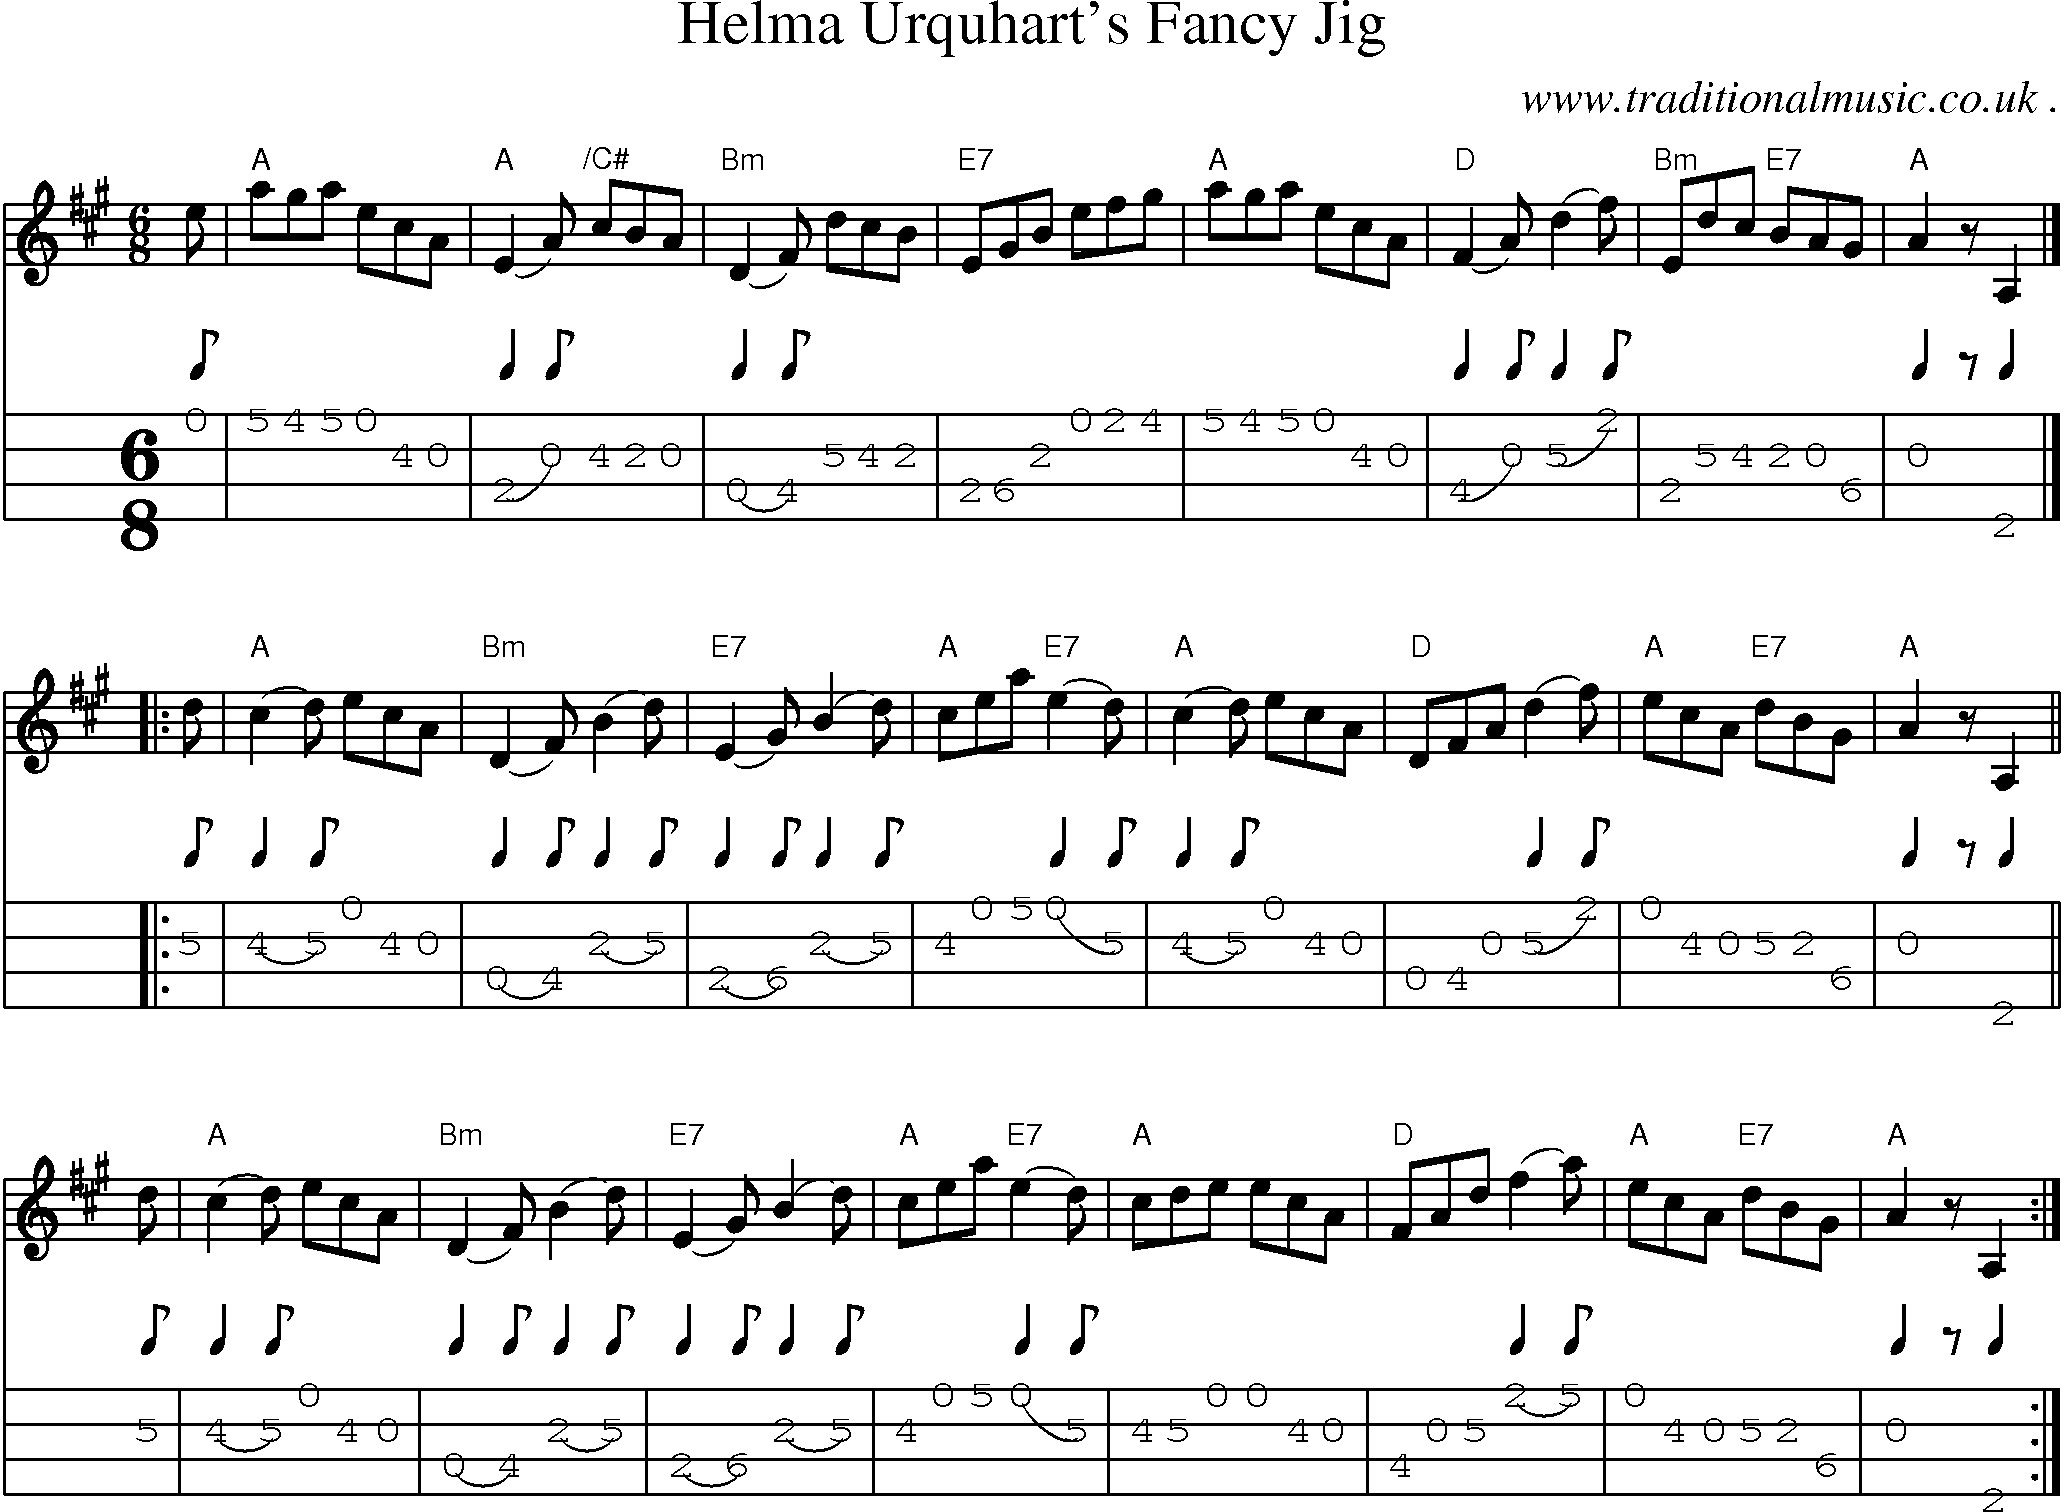 Sheet-music  score, Chords and Mandolin Tabs for Helma Urquharts Fancy Jig